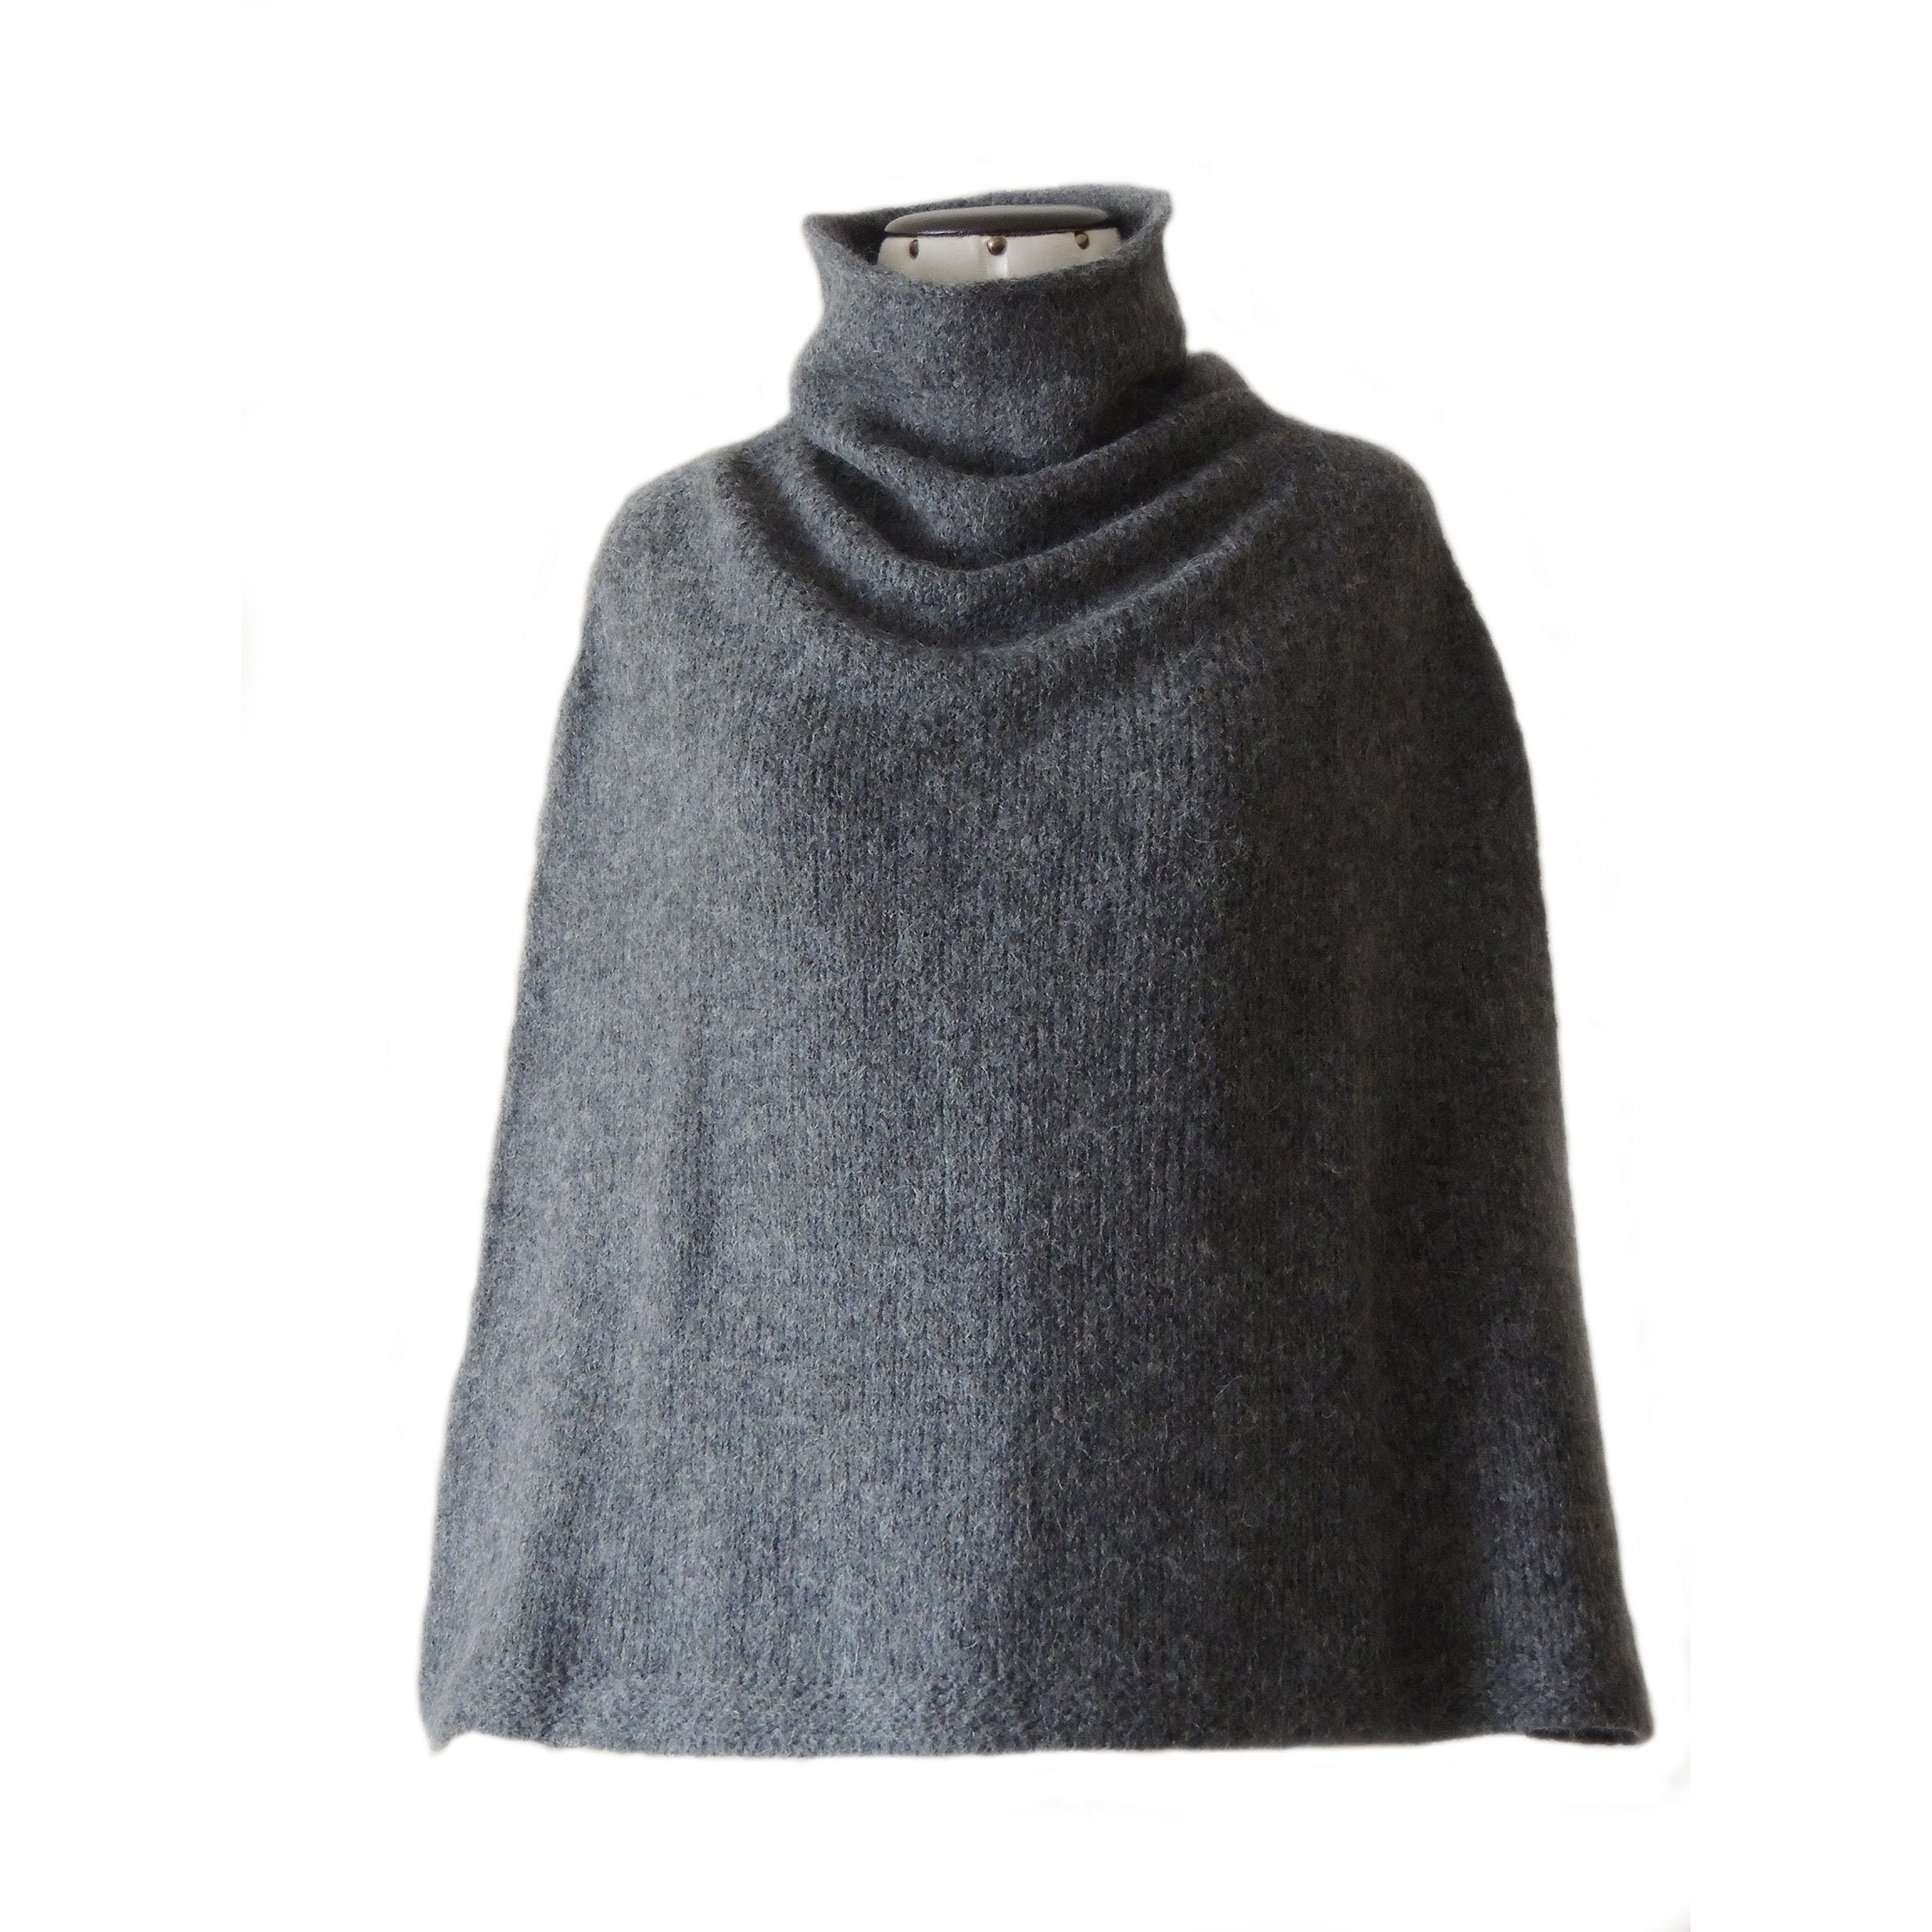 Poncho/Scarf Alpaca Blend Color Gray Women Poncho Also To Wear As A